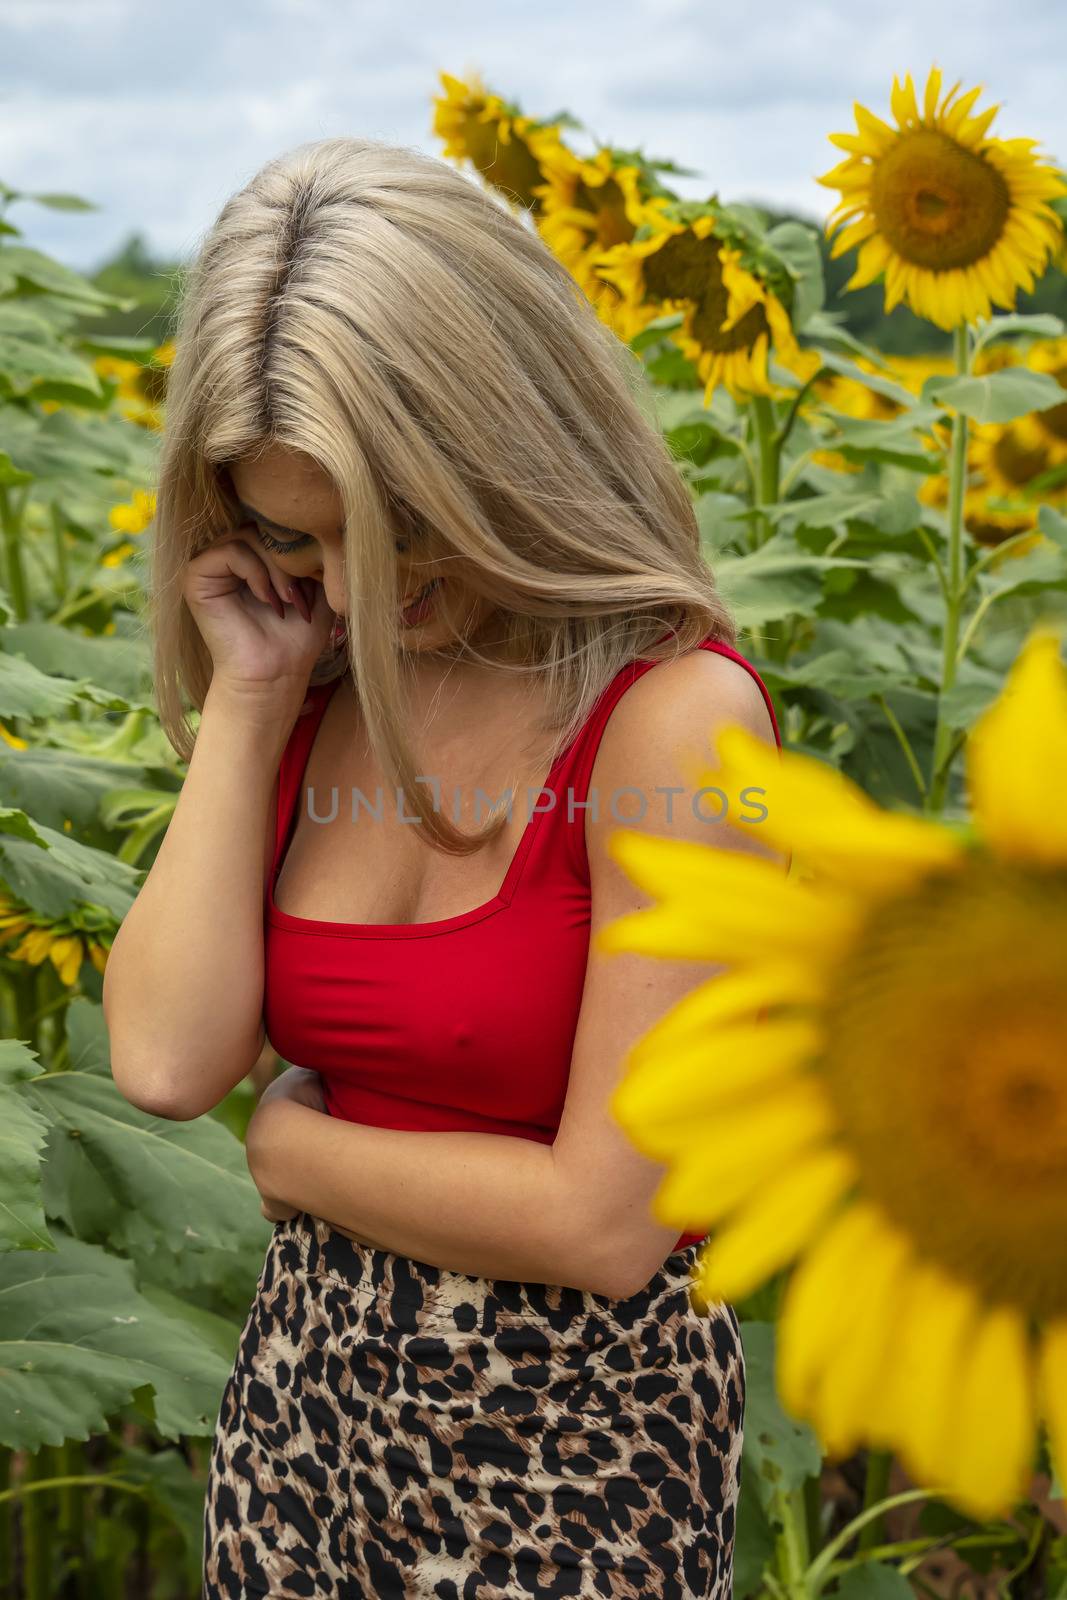 A Young Lovely Blonde Model Poses In A Gorgeous Sunflower Field While Enjoying A Summers Day by actionsports